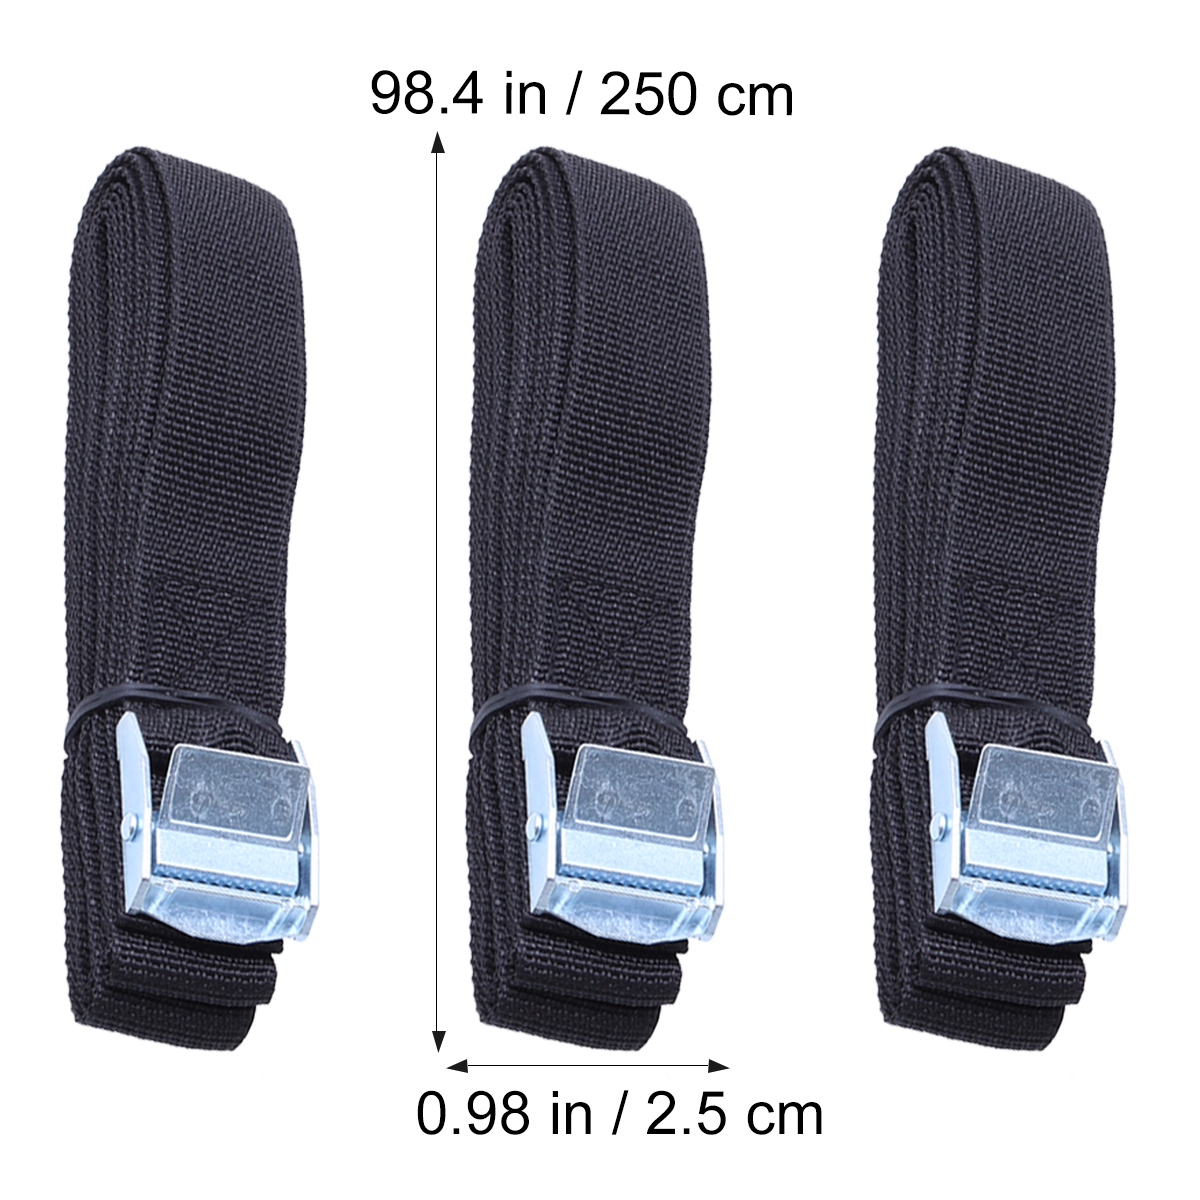 6/8Pcs Auto Lashing Straps With Buckle Nylon Car Straps For Cargo Tie Down Car Roof Rack Luggage Kayak Carrier Ratchet Belt